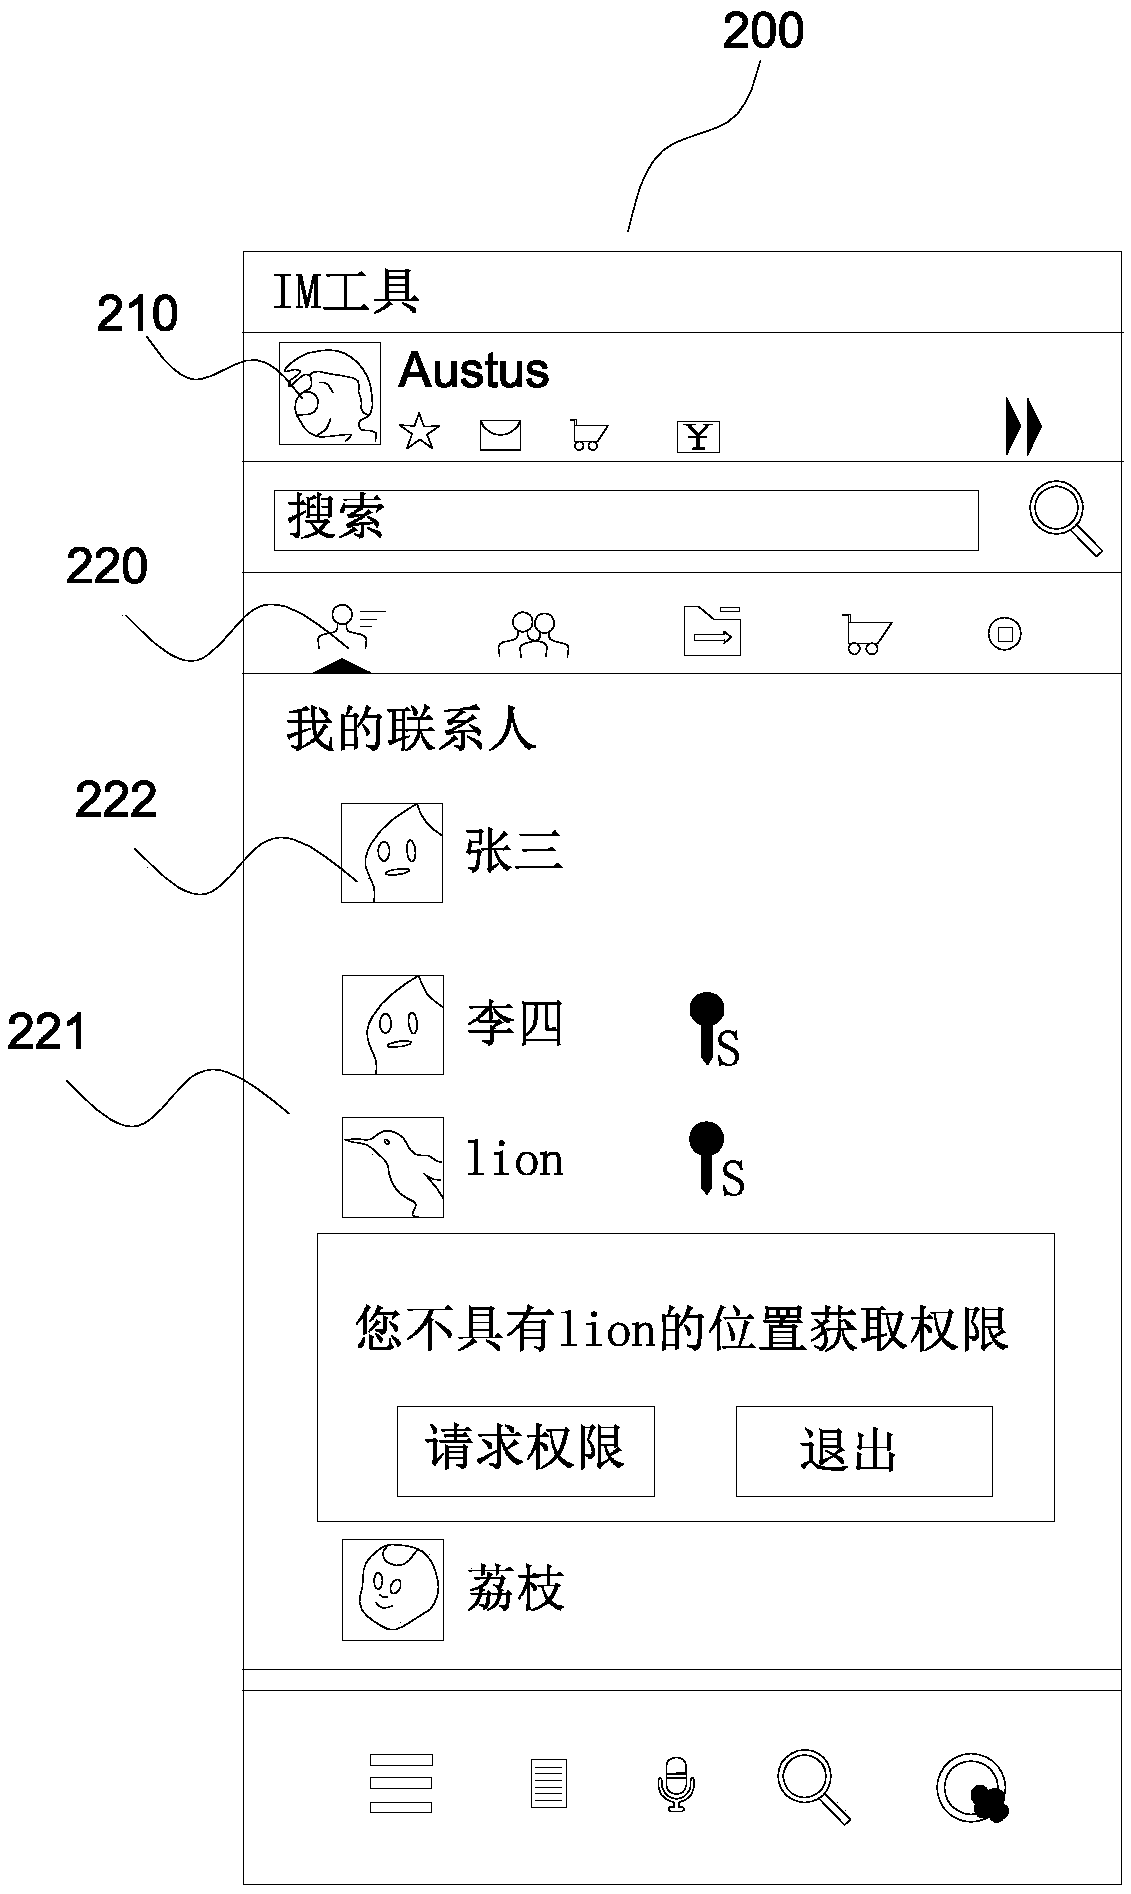 Signature notification method and system, and instant messaging tool